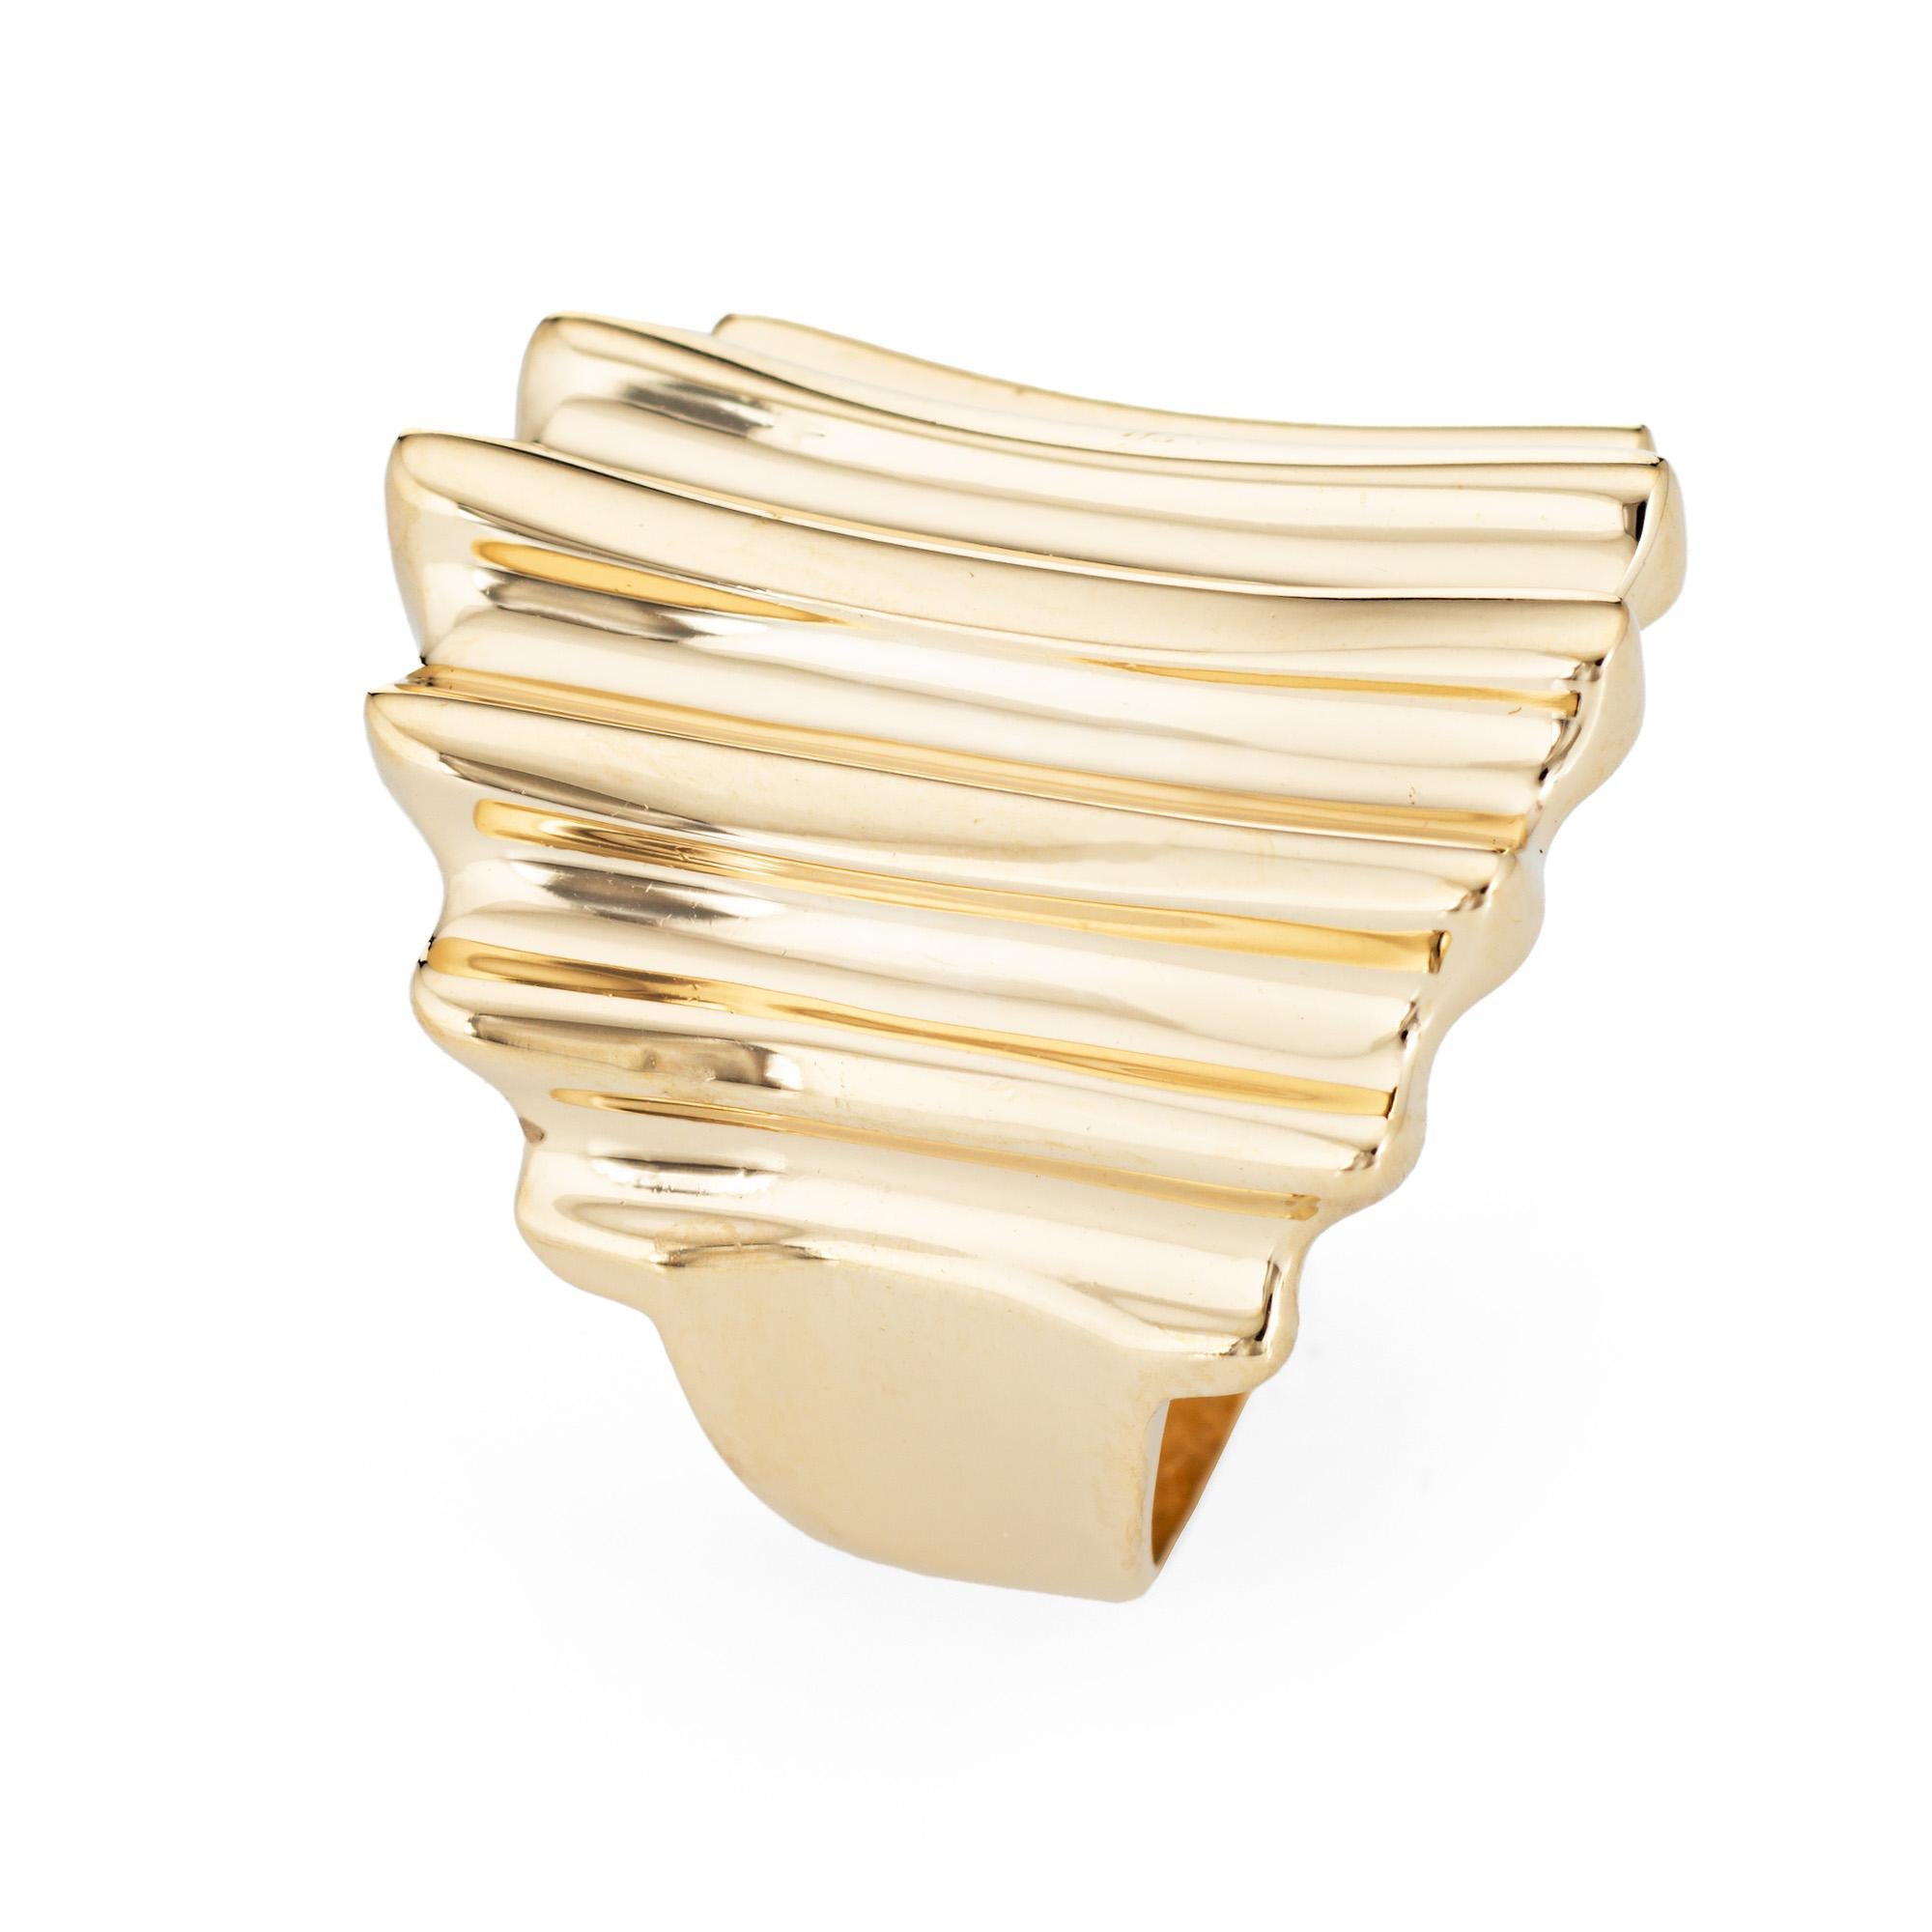 Stylish vintage sculpted cocktail ring (circa 1980s to 1990s) crafted in 14 karat yellow gold. 

The distinct & stylish ring features a concave ridged design that makes a bold statement on the hand. The low rise ring (4.5mm - 0.17 inches) sits